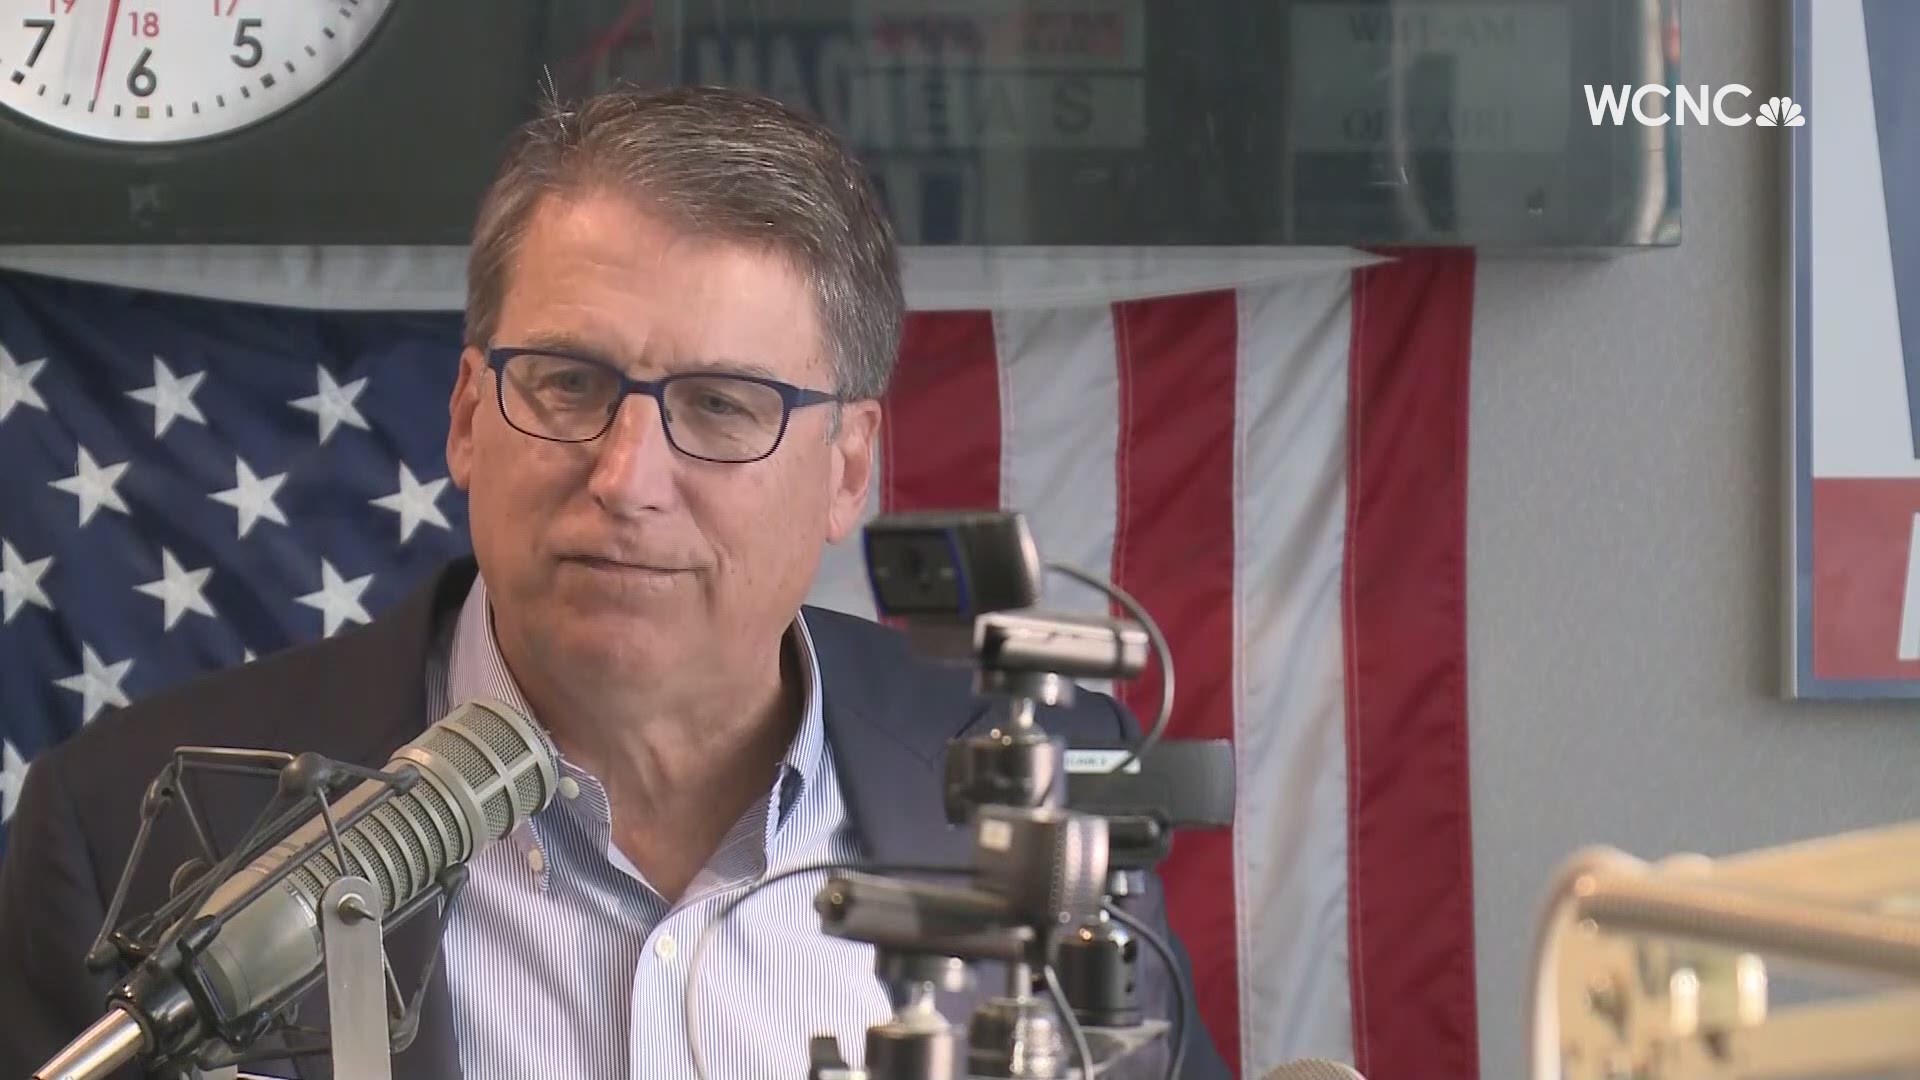 Former Governor Pat McCrory announced Thursday he is eyeing the U.S. Senate in 2022.